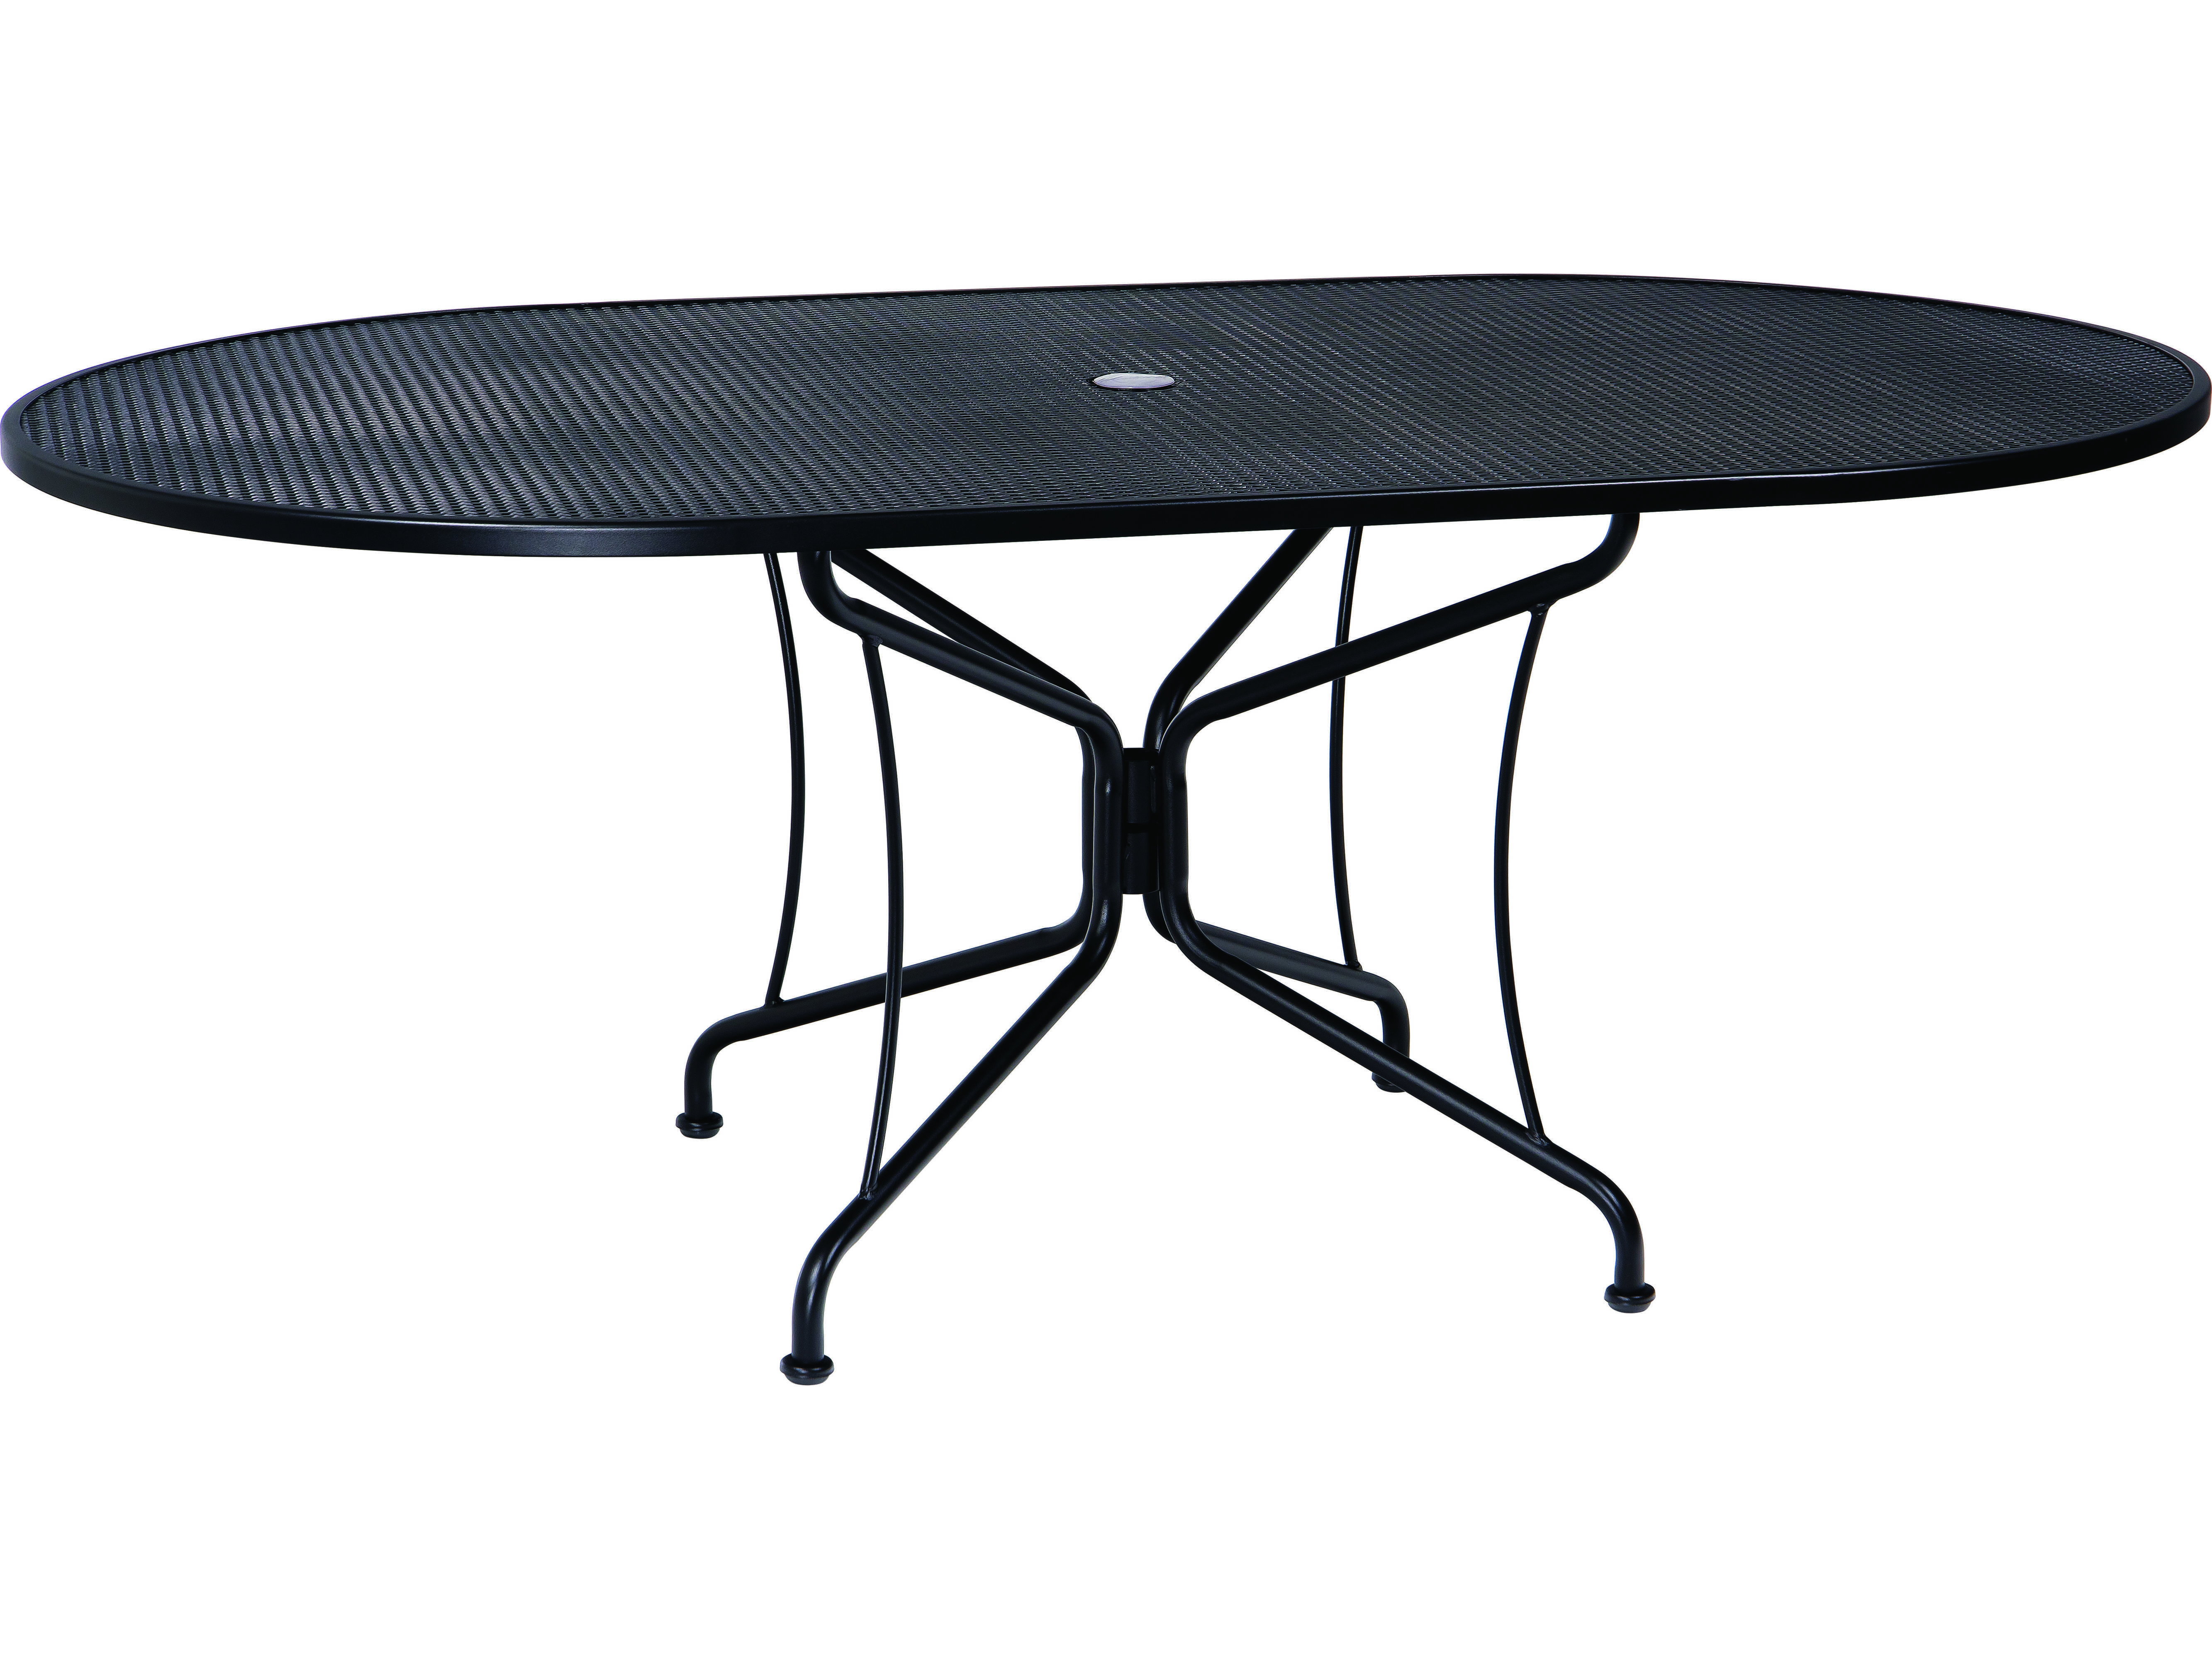 Woodard Wrought Iron Mesh 72''W x 42''D Oval 8 Spoke Dining Table with ...